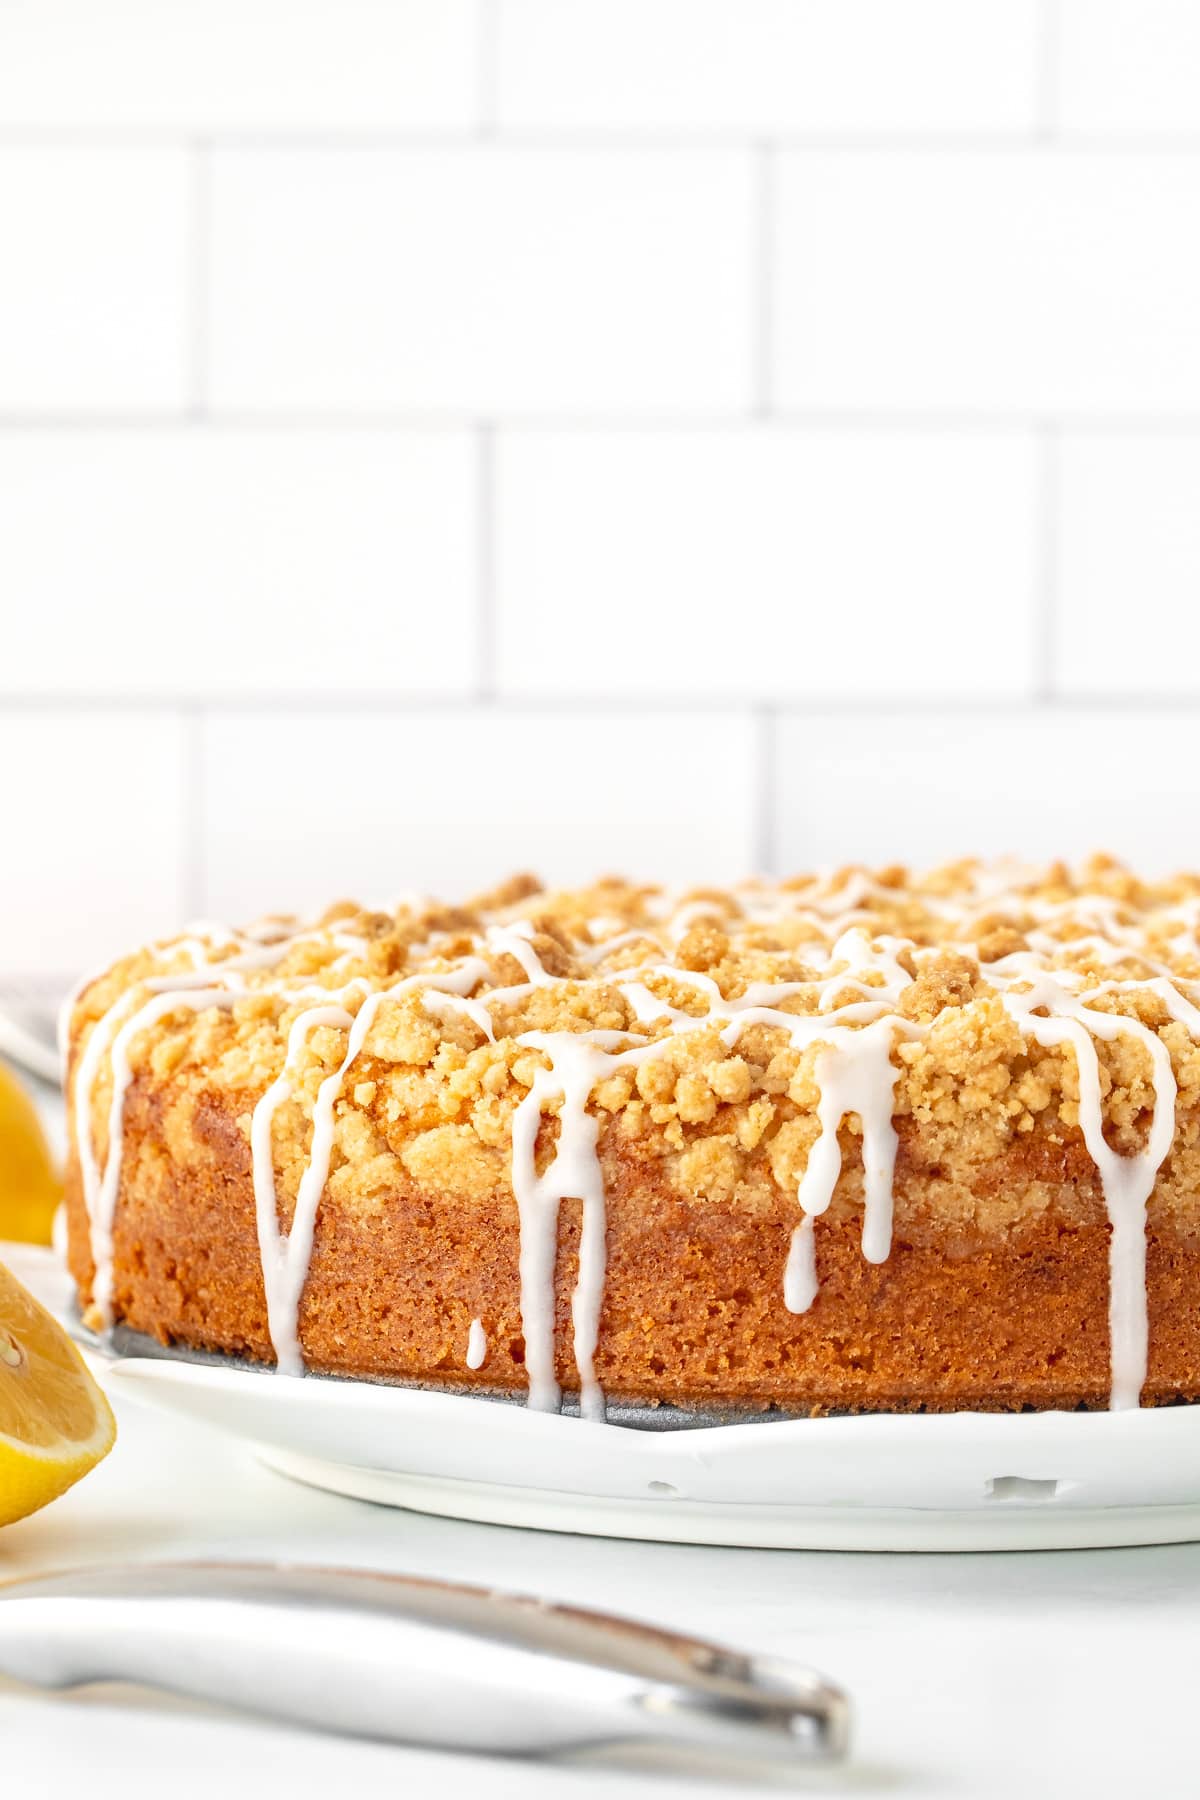 9-inch round lemon coffee cake with streusel topping drizzled with glaze